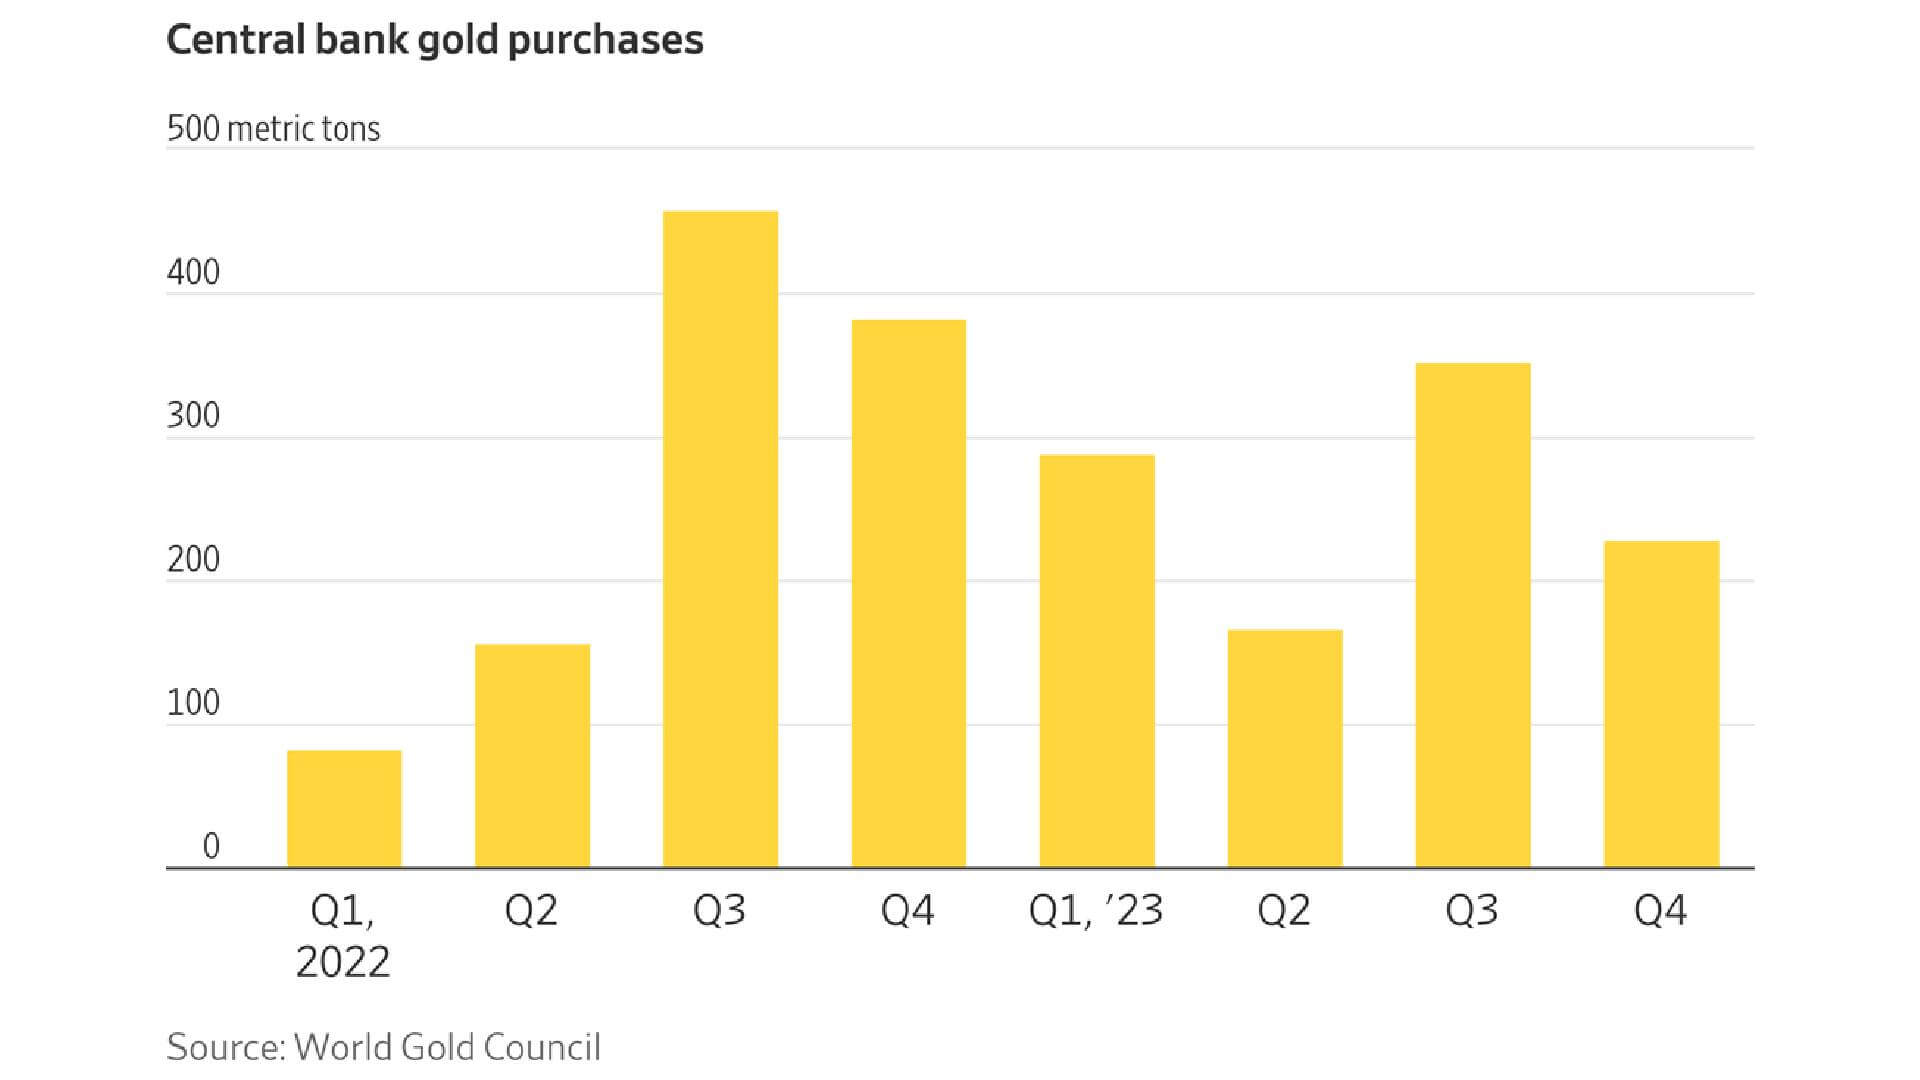 Can Gold Stay Above $2,000/oz With Declining Central Bank Purchases?